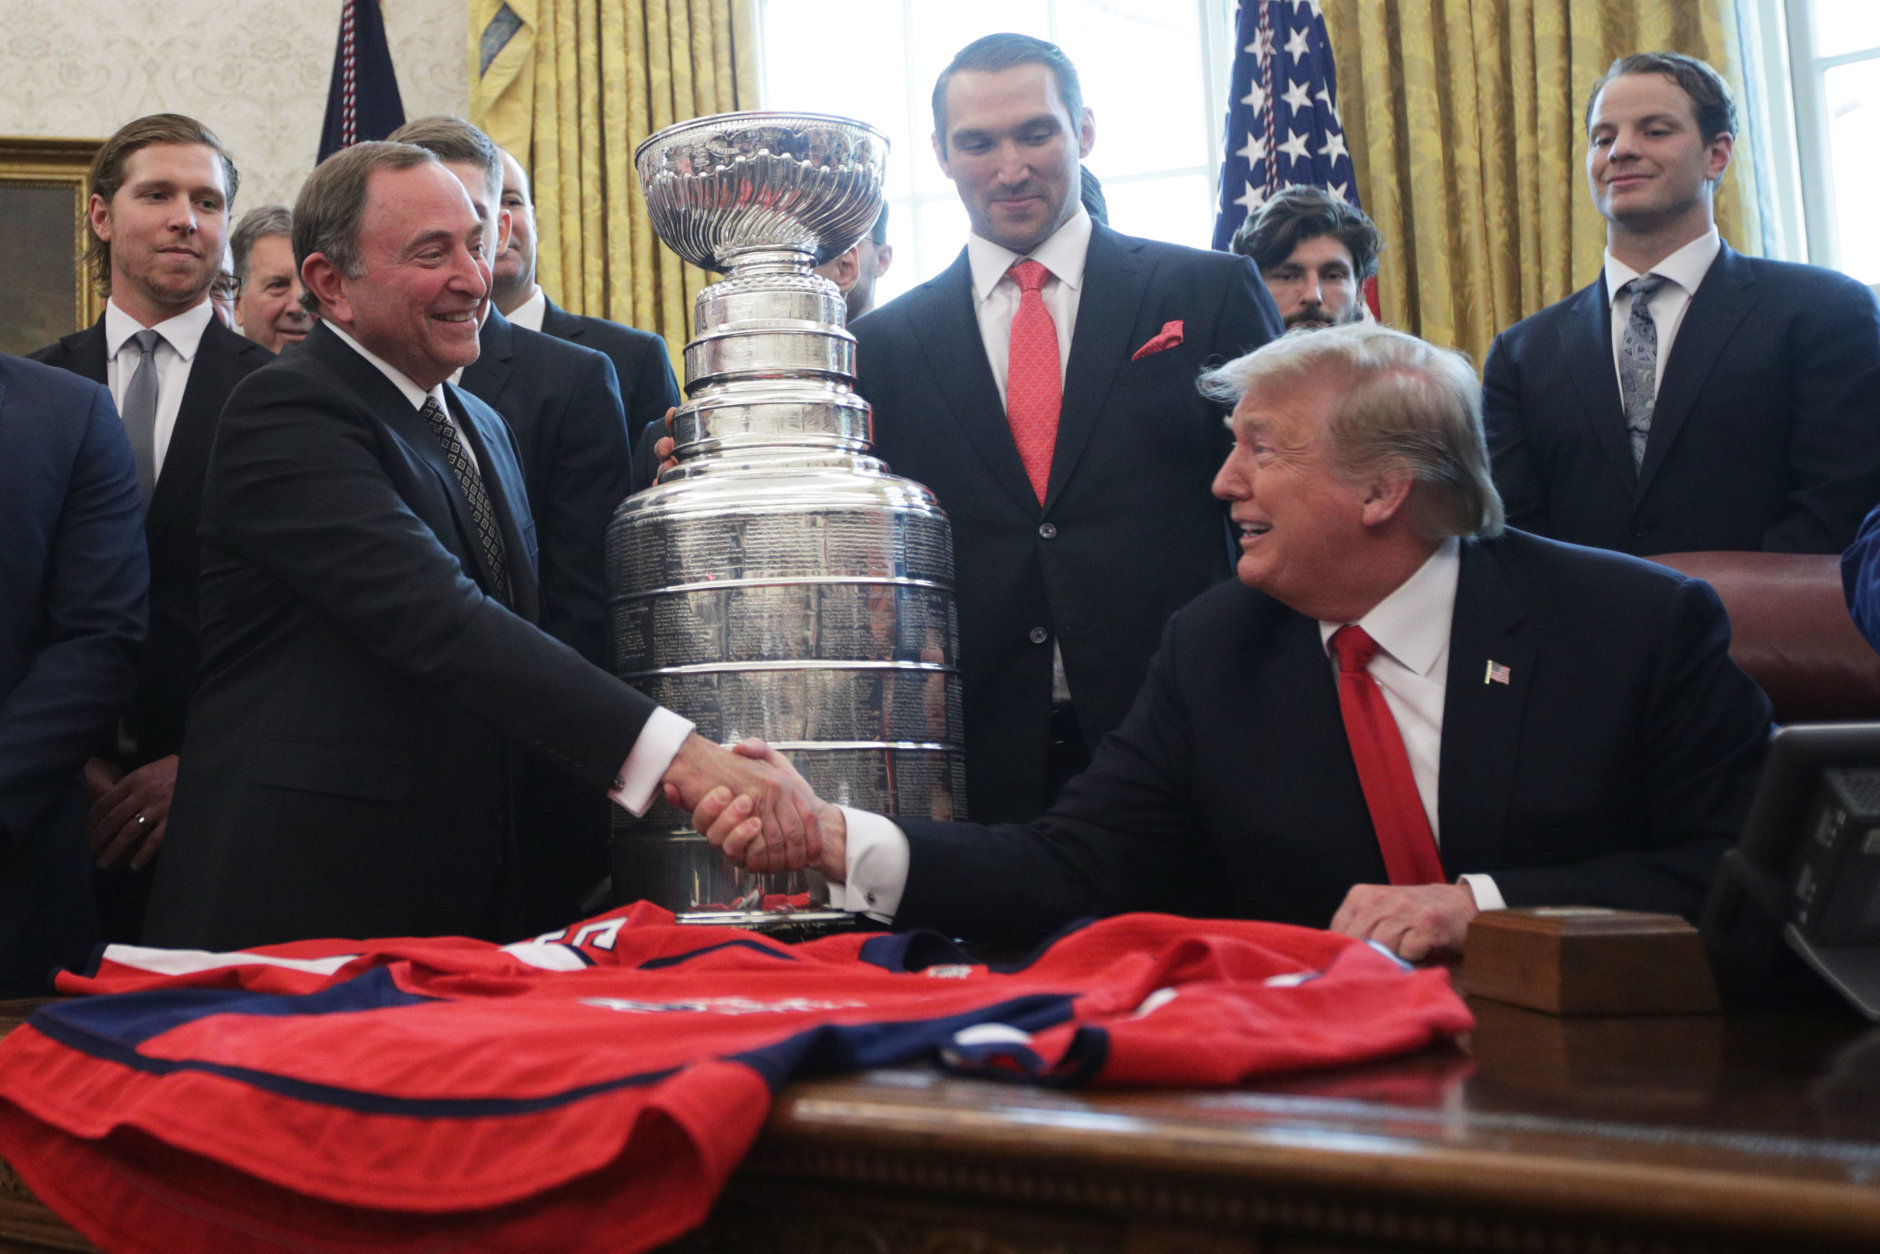 WASHINGTON, DC - MARCH 25:  U.S. President Donald Trump shakes hands with National Hockey League commissioner Gary Bettman during an Oval Office event at the White House March 25, 2019 in Washington, DC. President Trump hosted the Washington Capitals to honor their 2018 Stanley Cup championship. (Photo by Alex Wong/Getty Images)